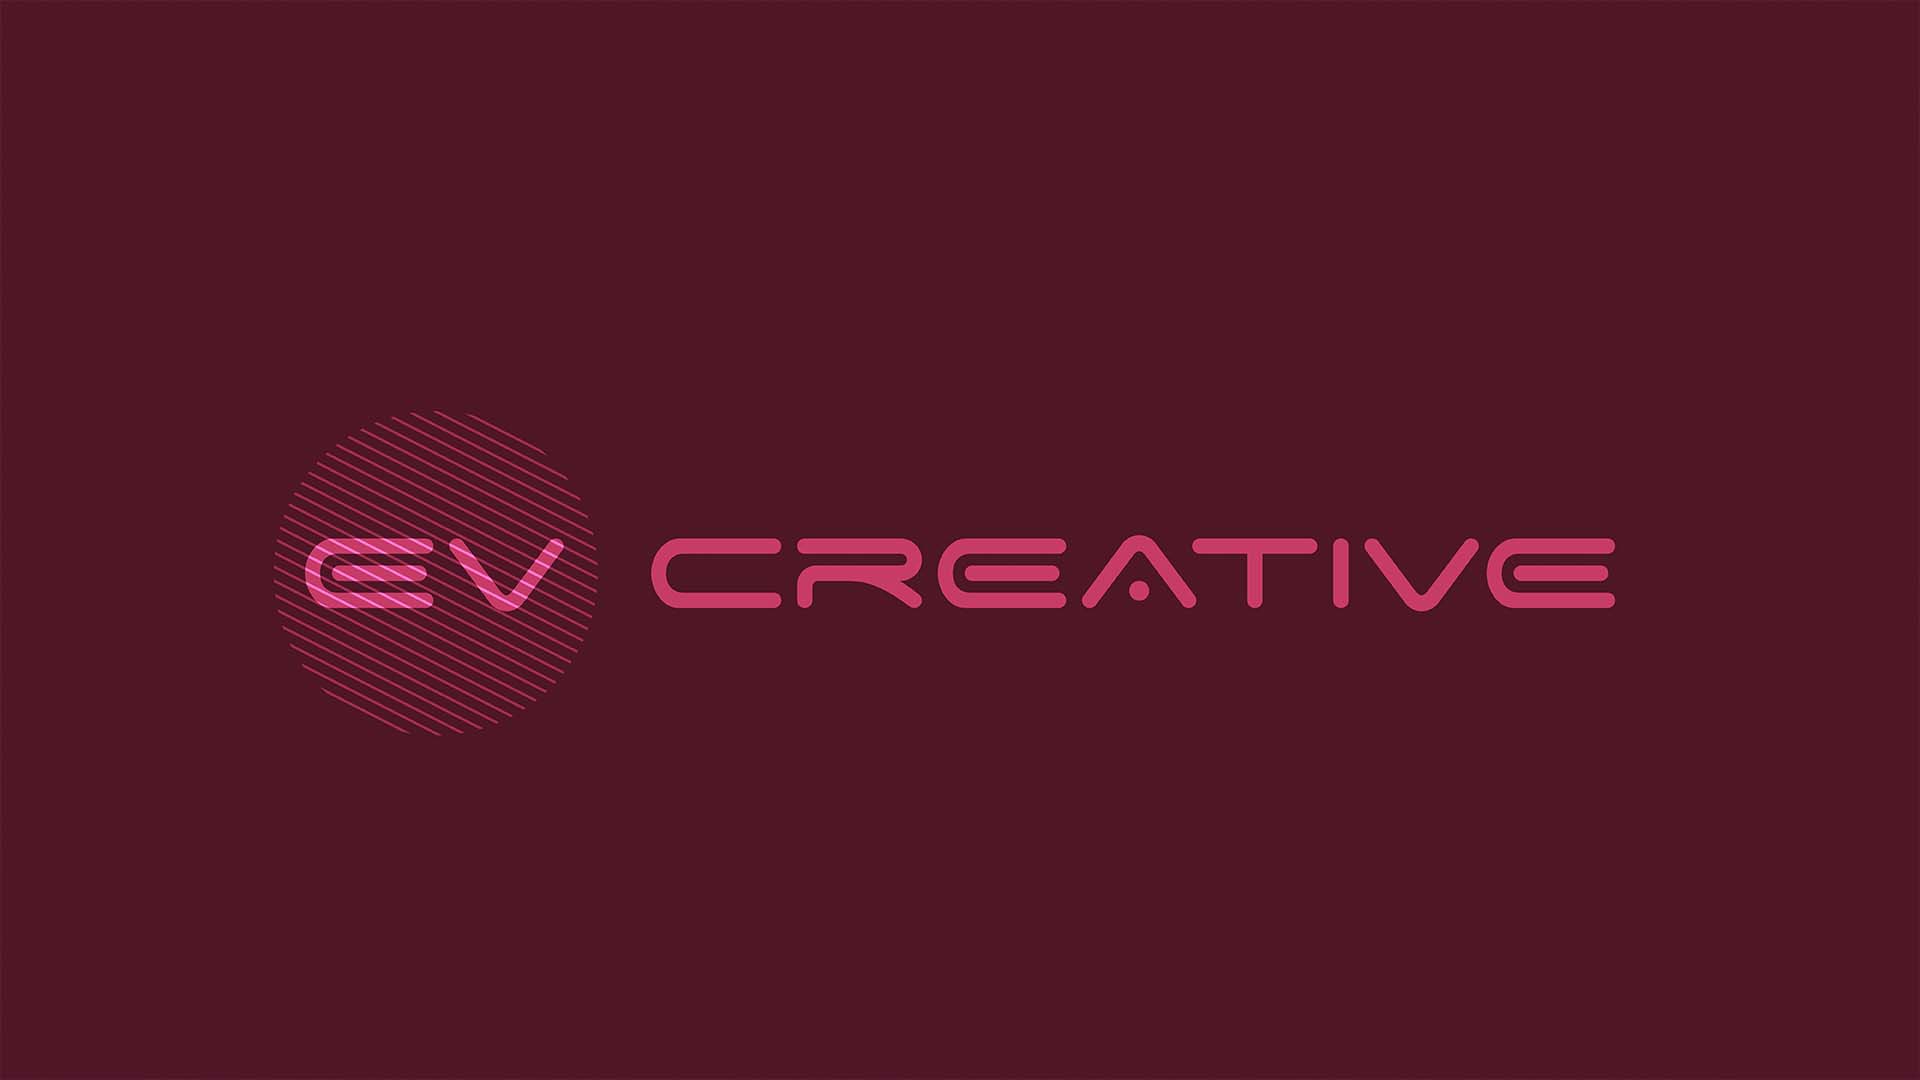  / This is the ev creative. 